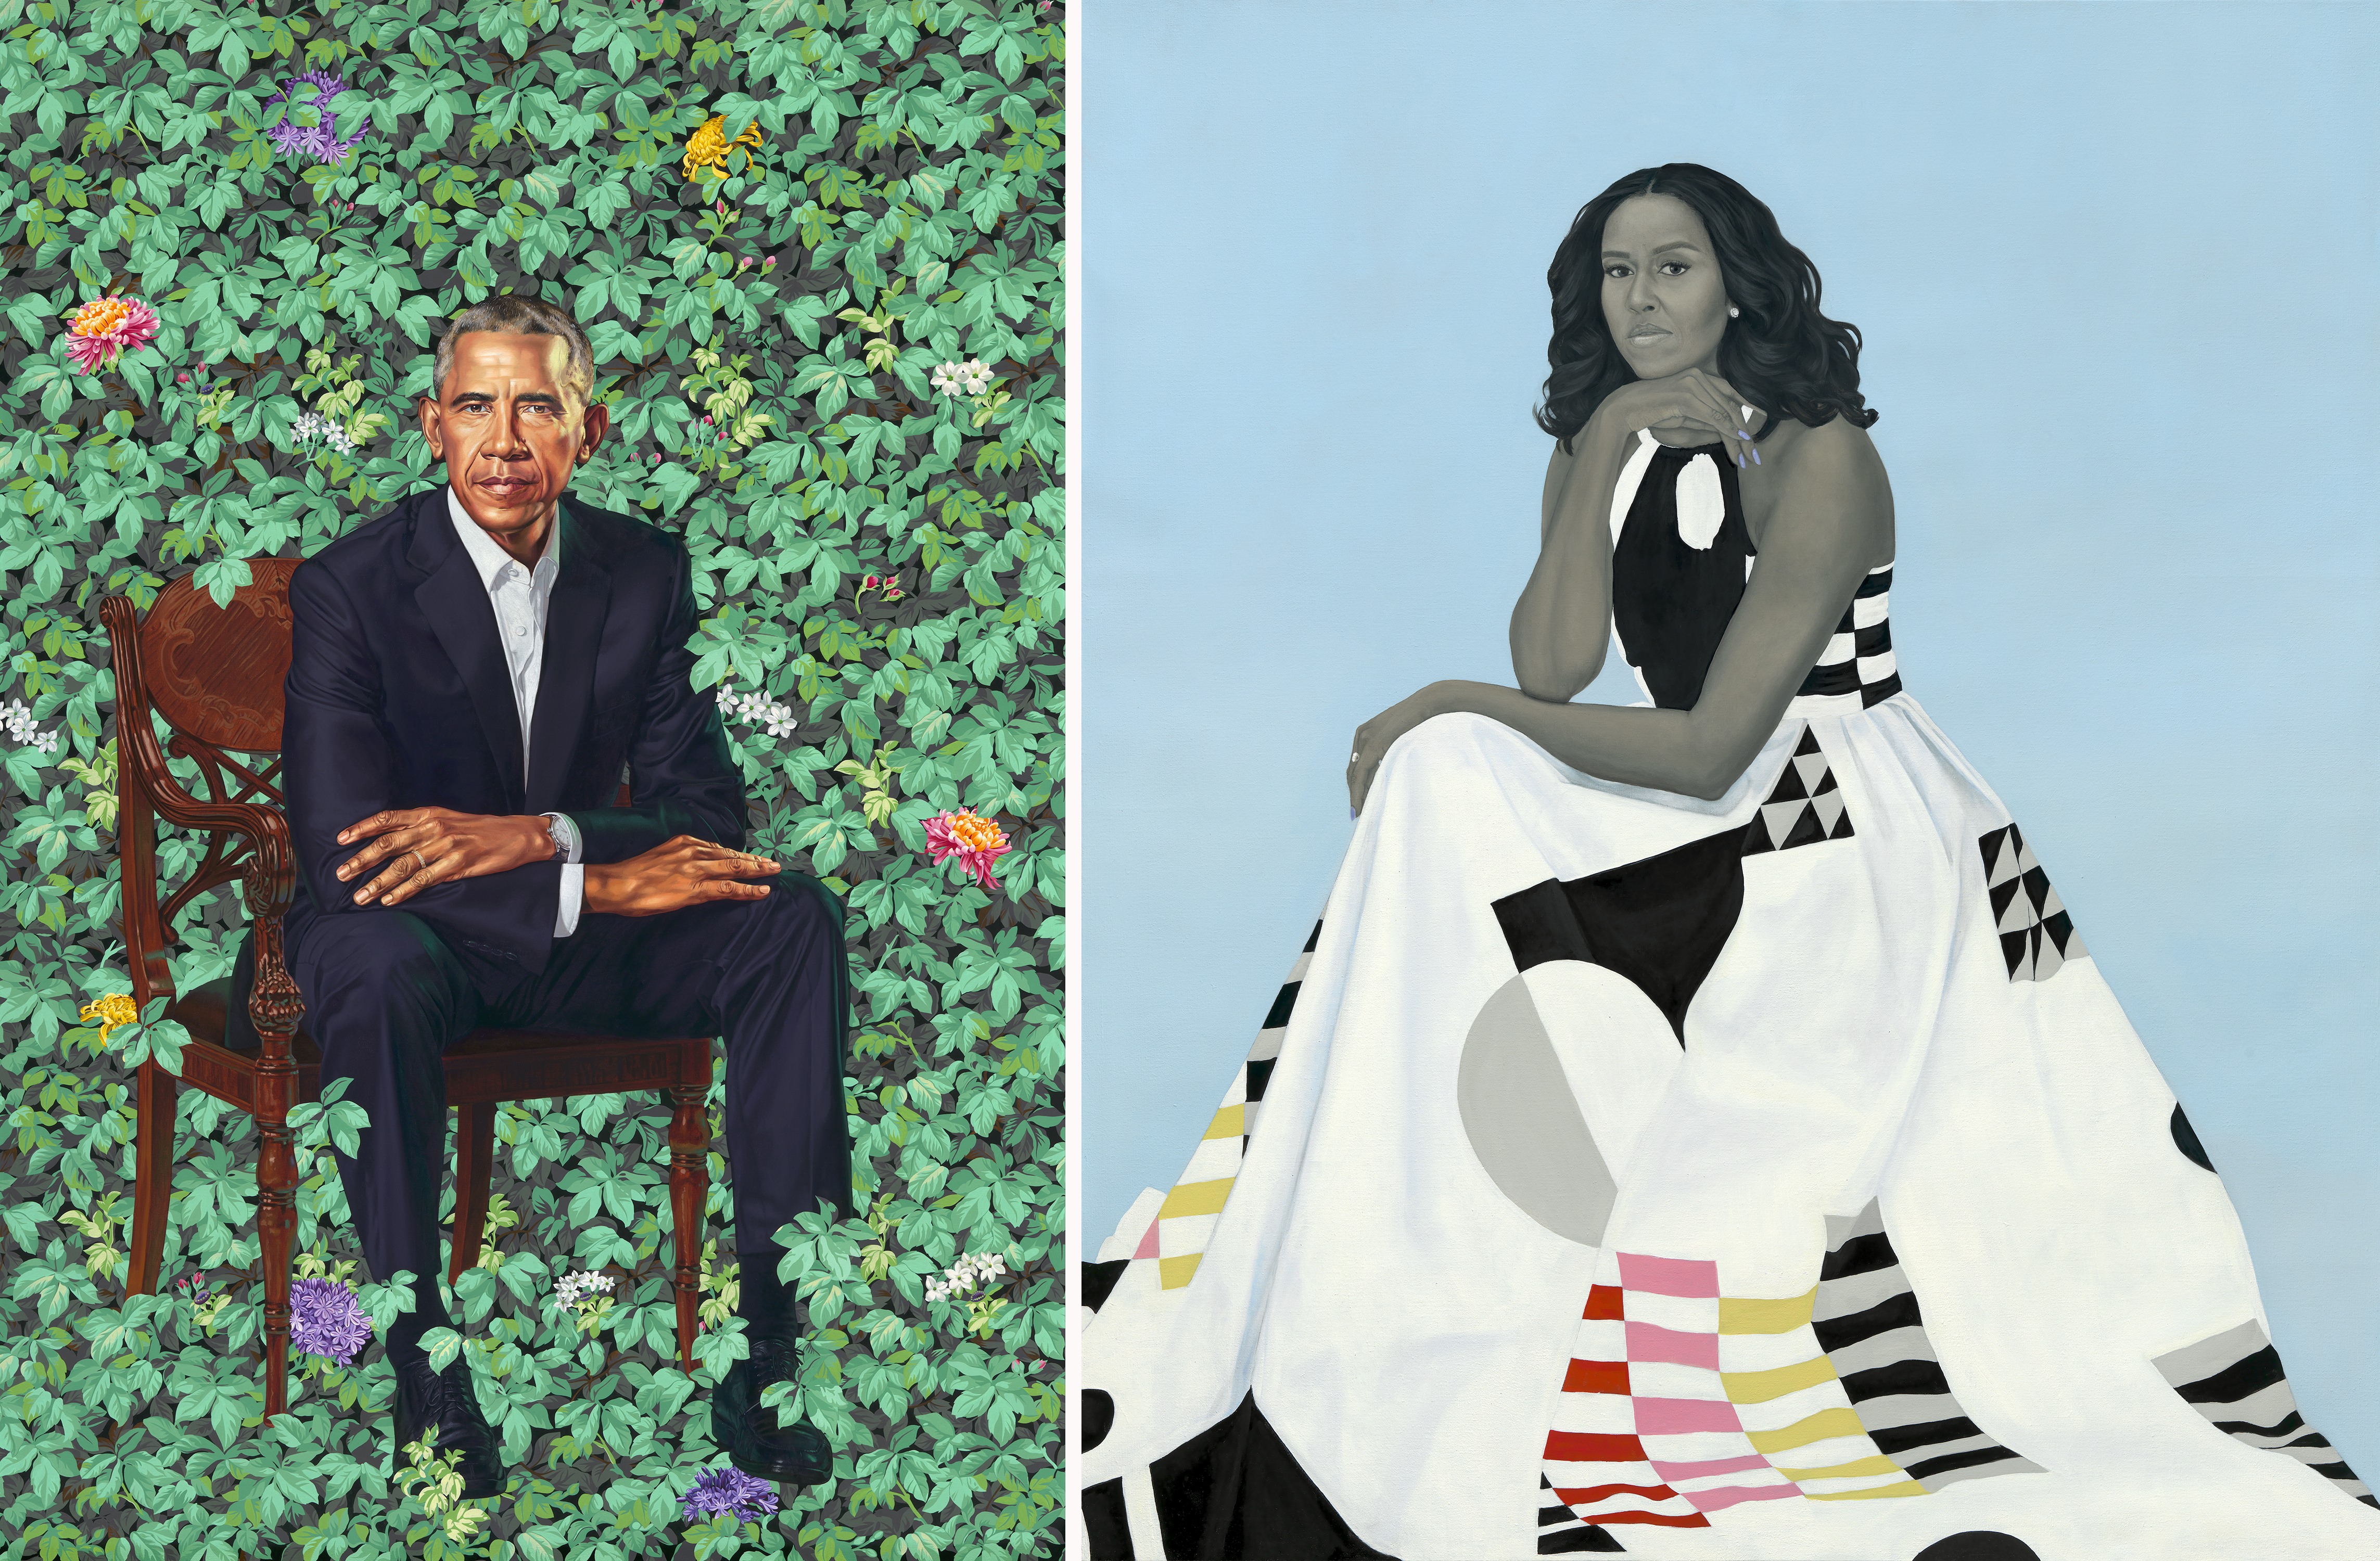 Official portraits of Barack and Michelle Obama